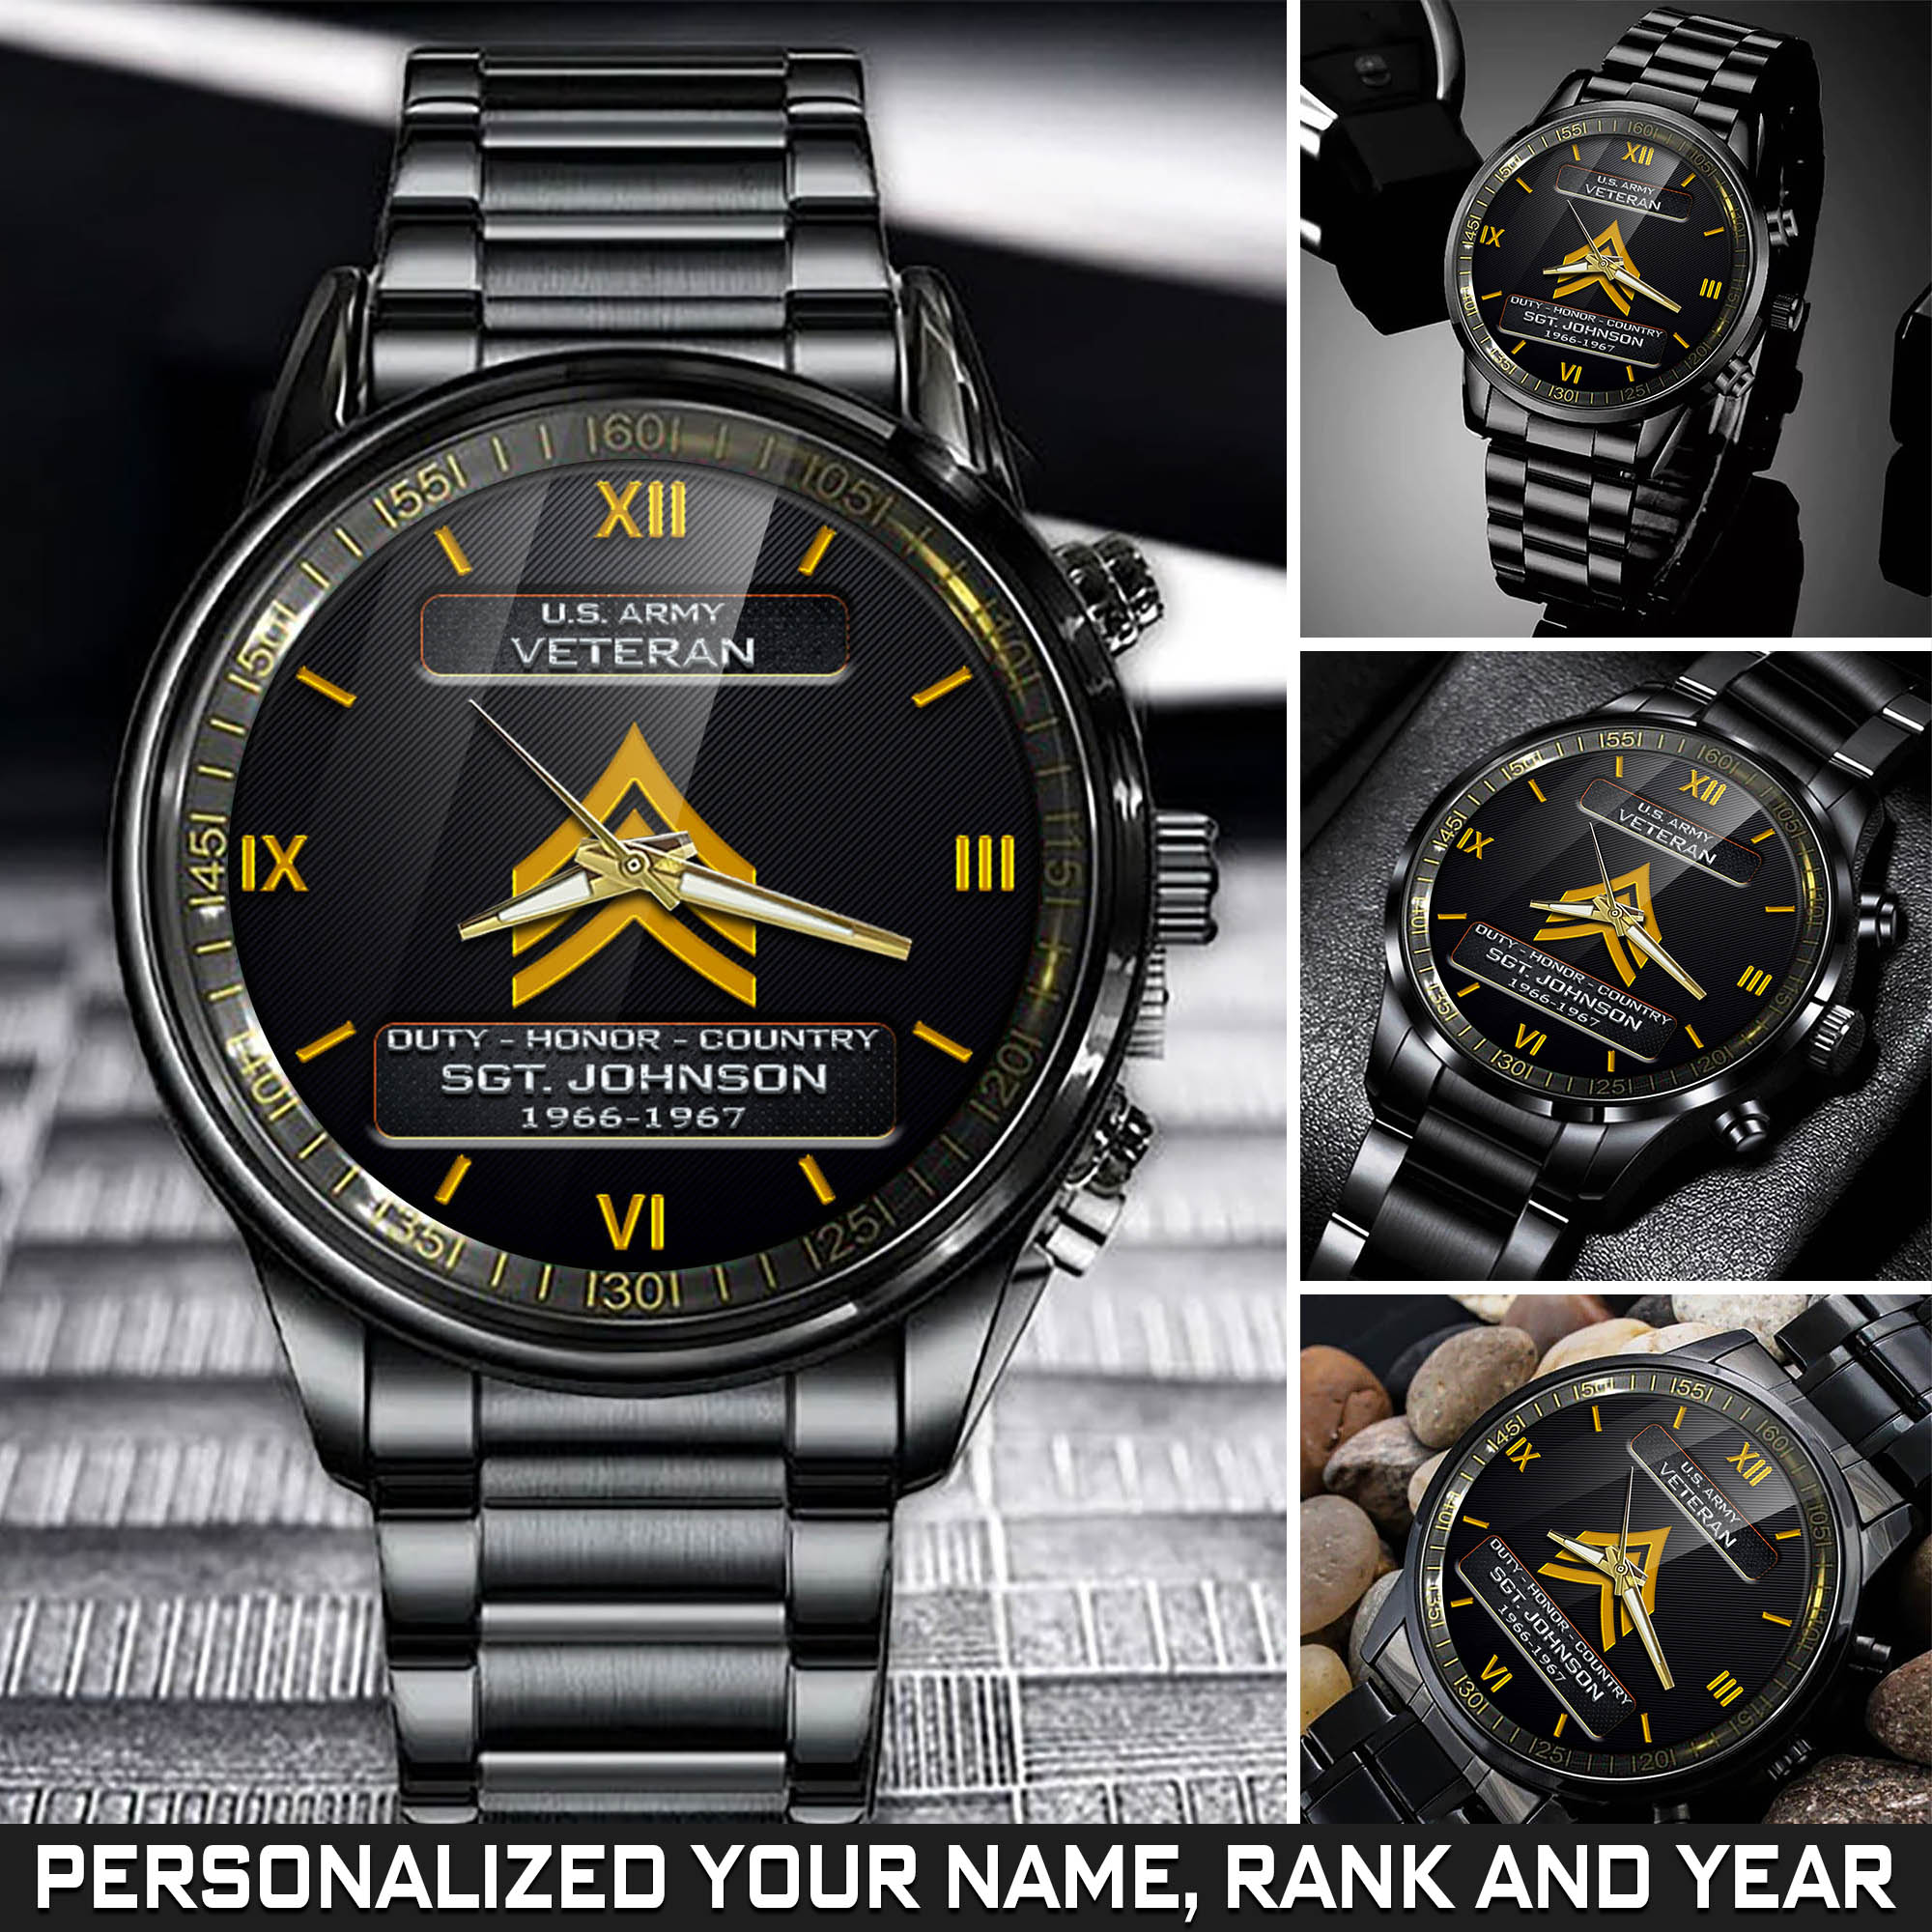 Personalized U.S. Army Veteran Black Fashion Watch With Your Name, Year And Rank, Military Watch For Veterans, Gift For Veterans ETHY-57684